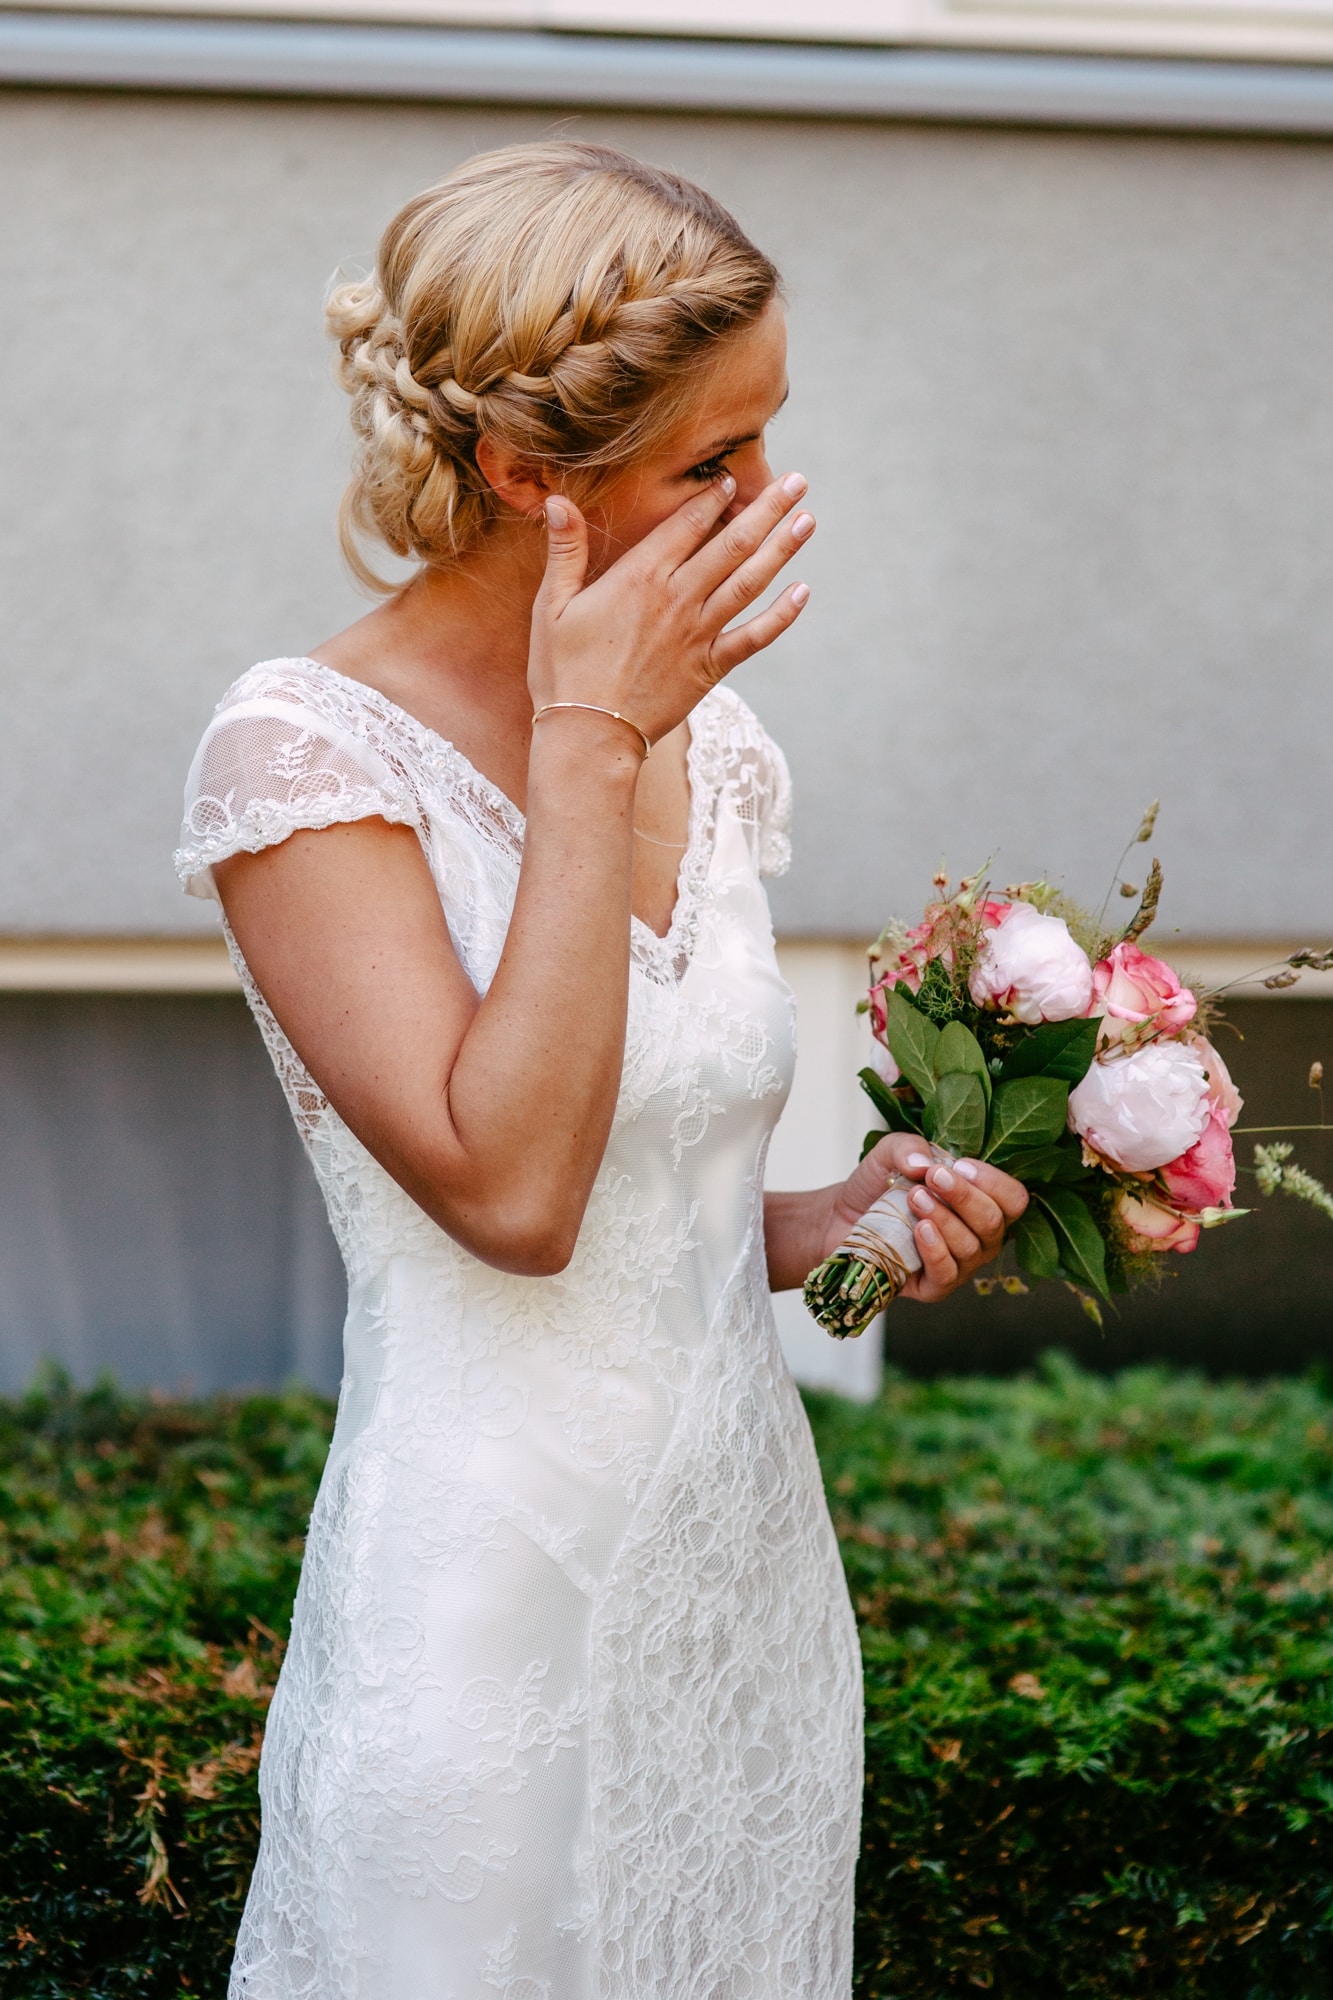 A Bohemian bride in a white wedding dress covering her face.